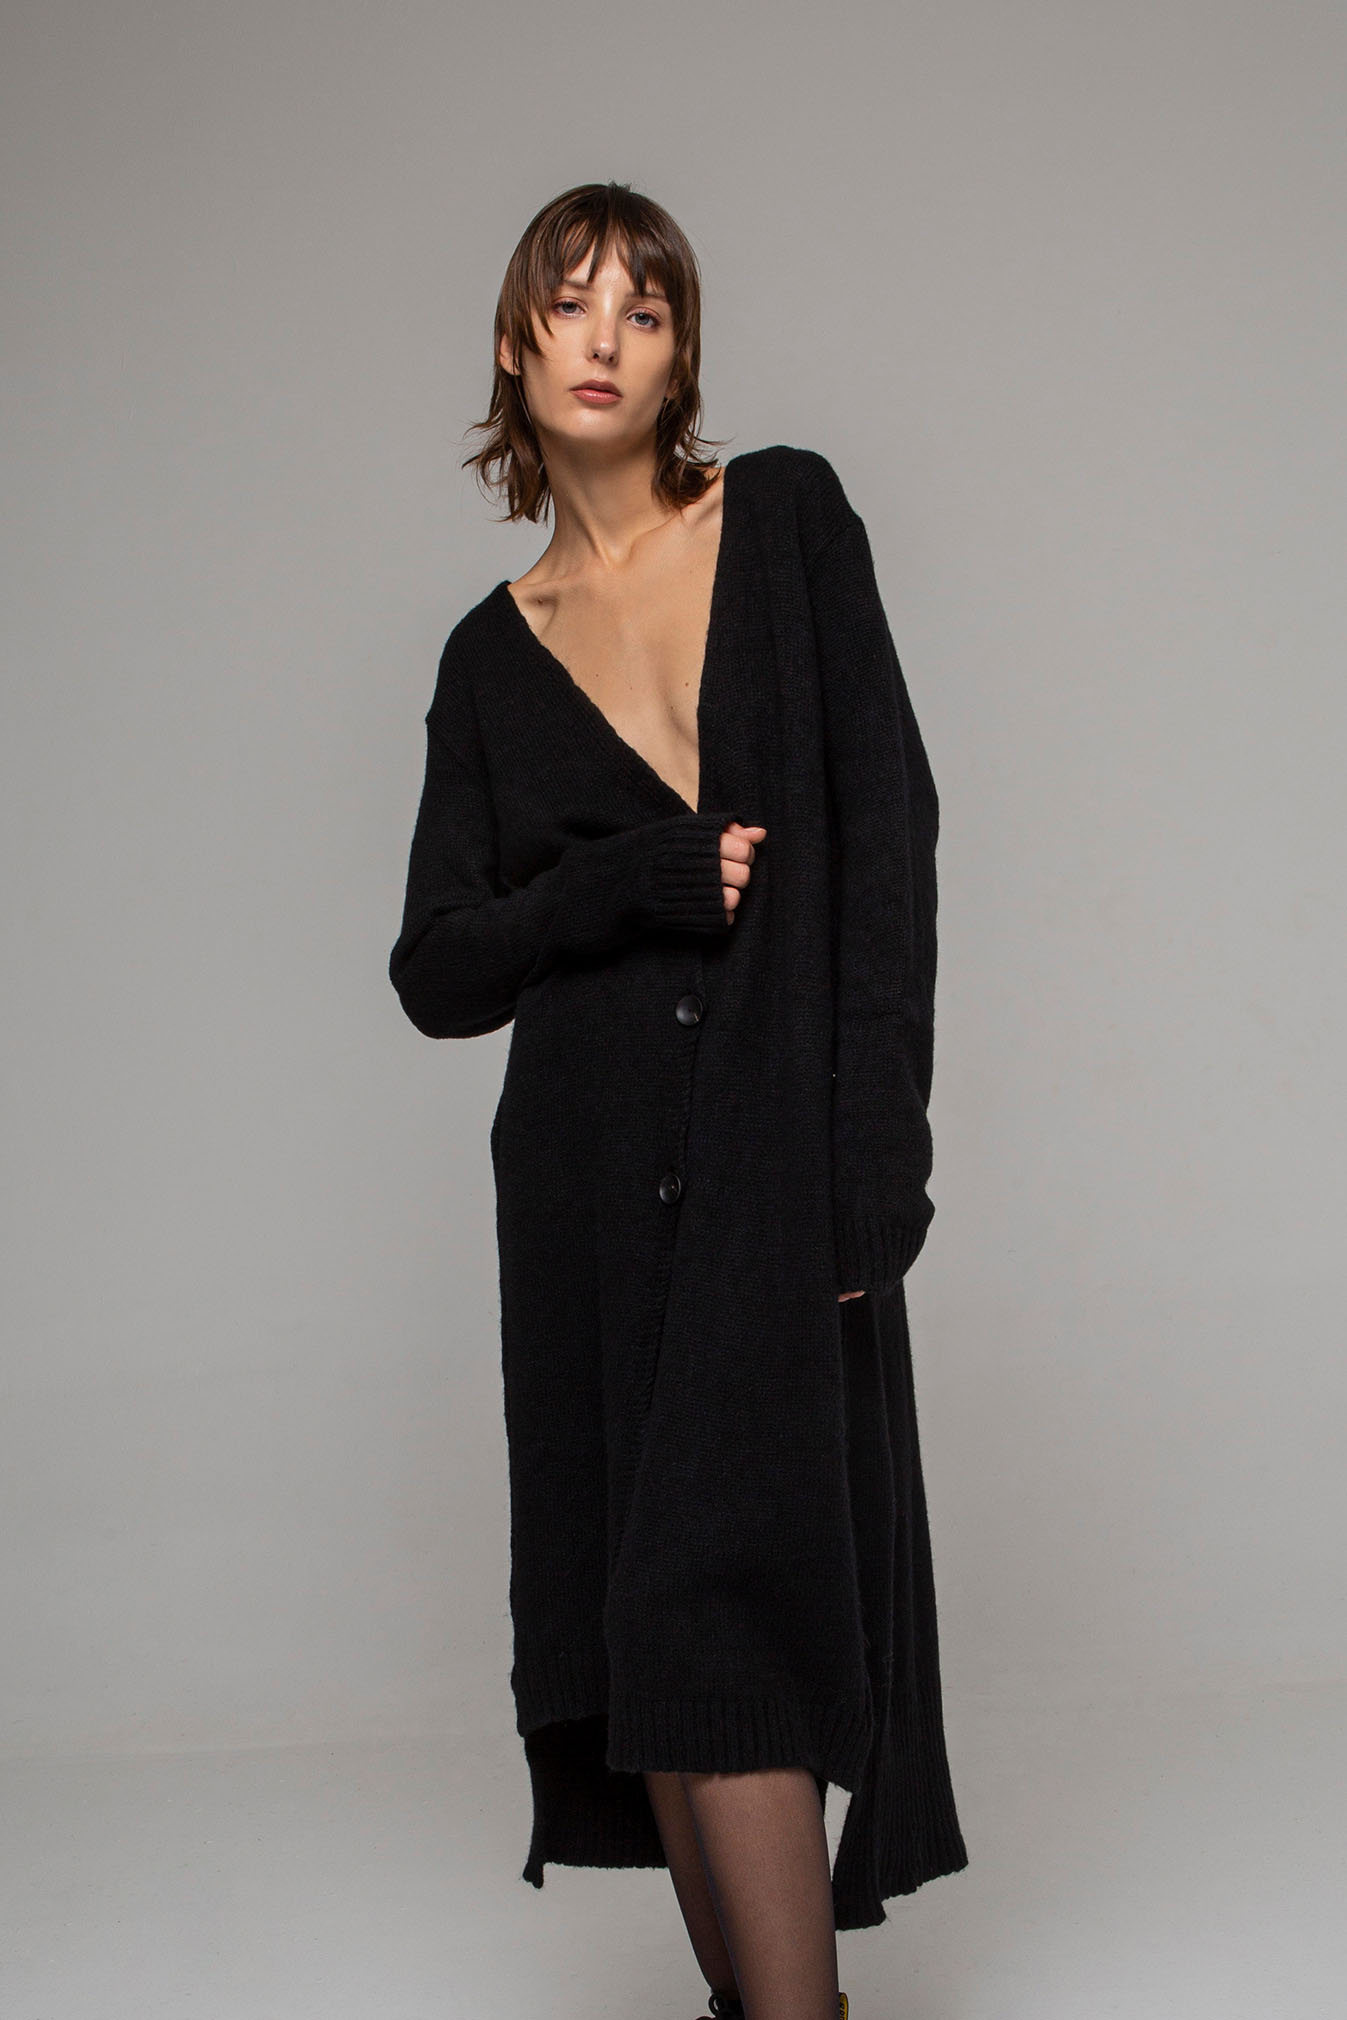 Women's Long Cardigan by Noble Athens